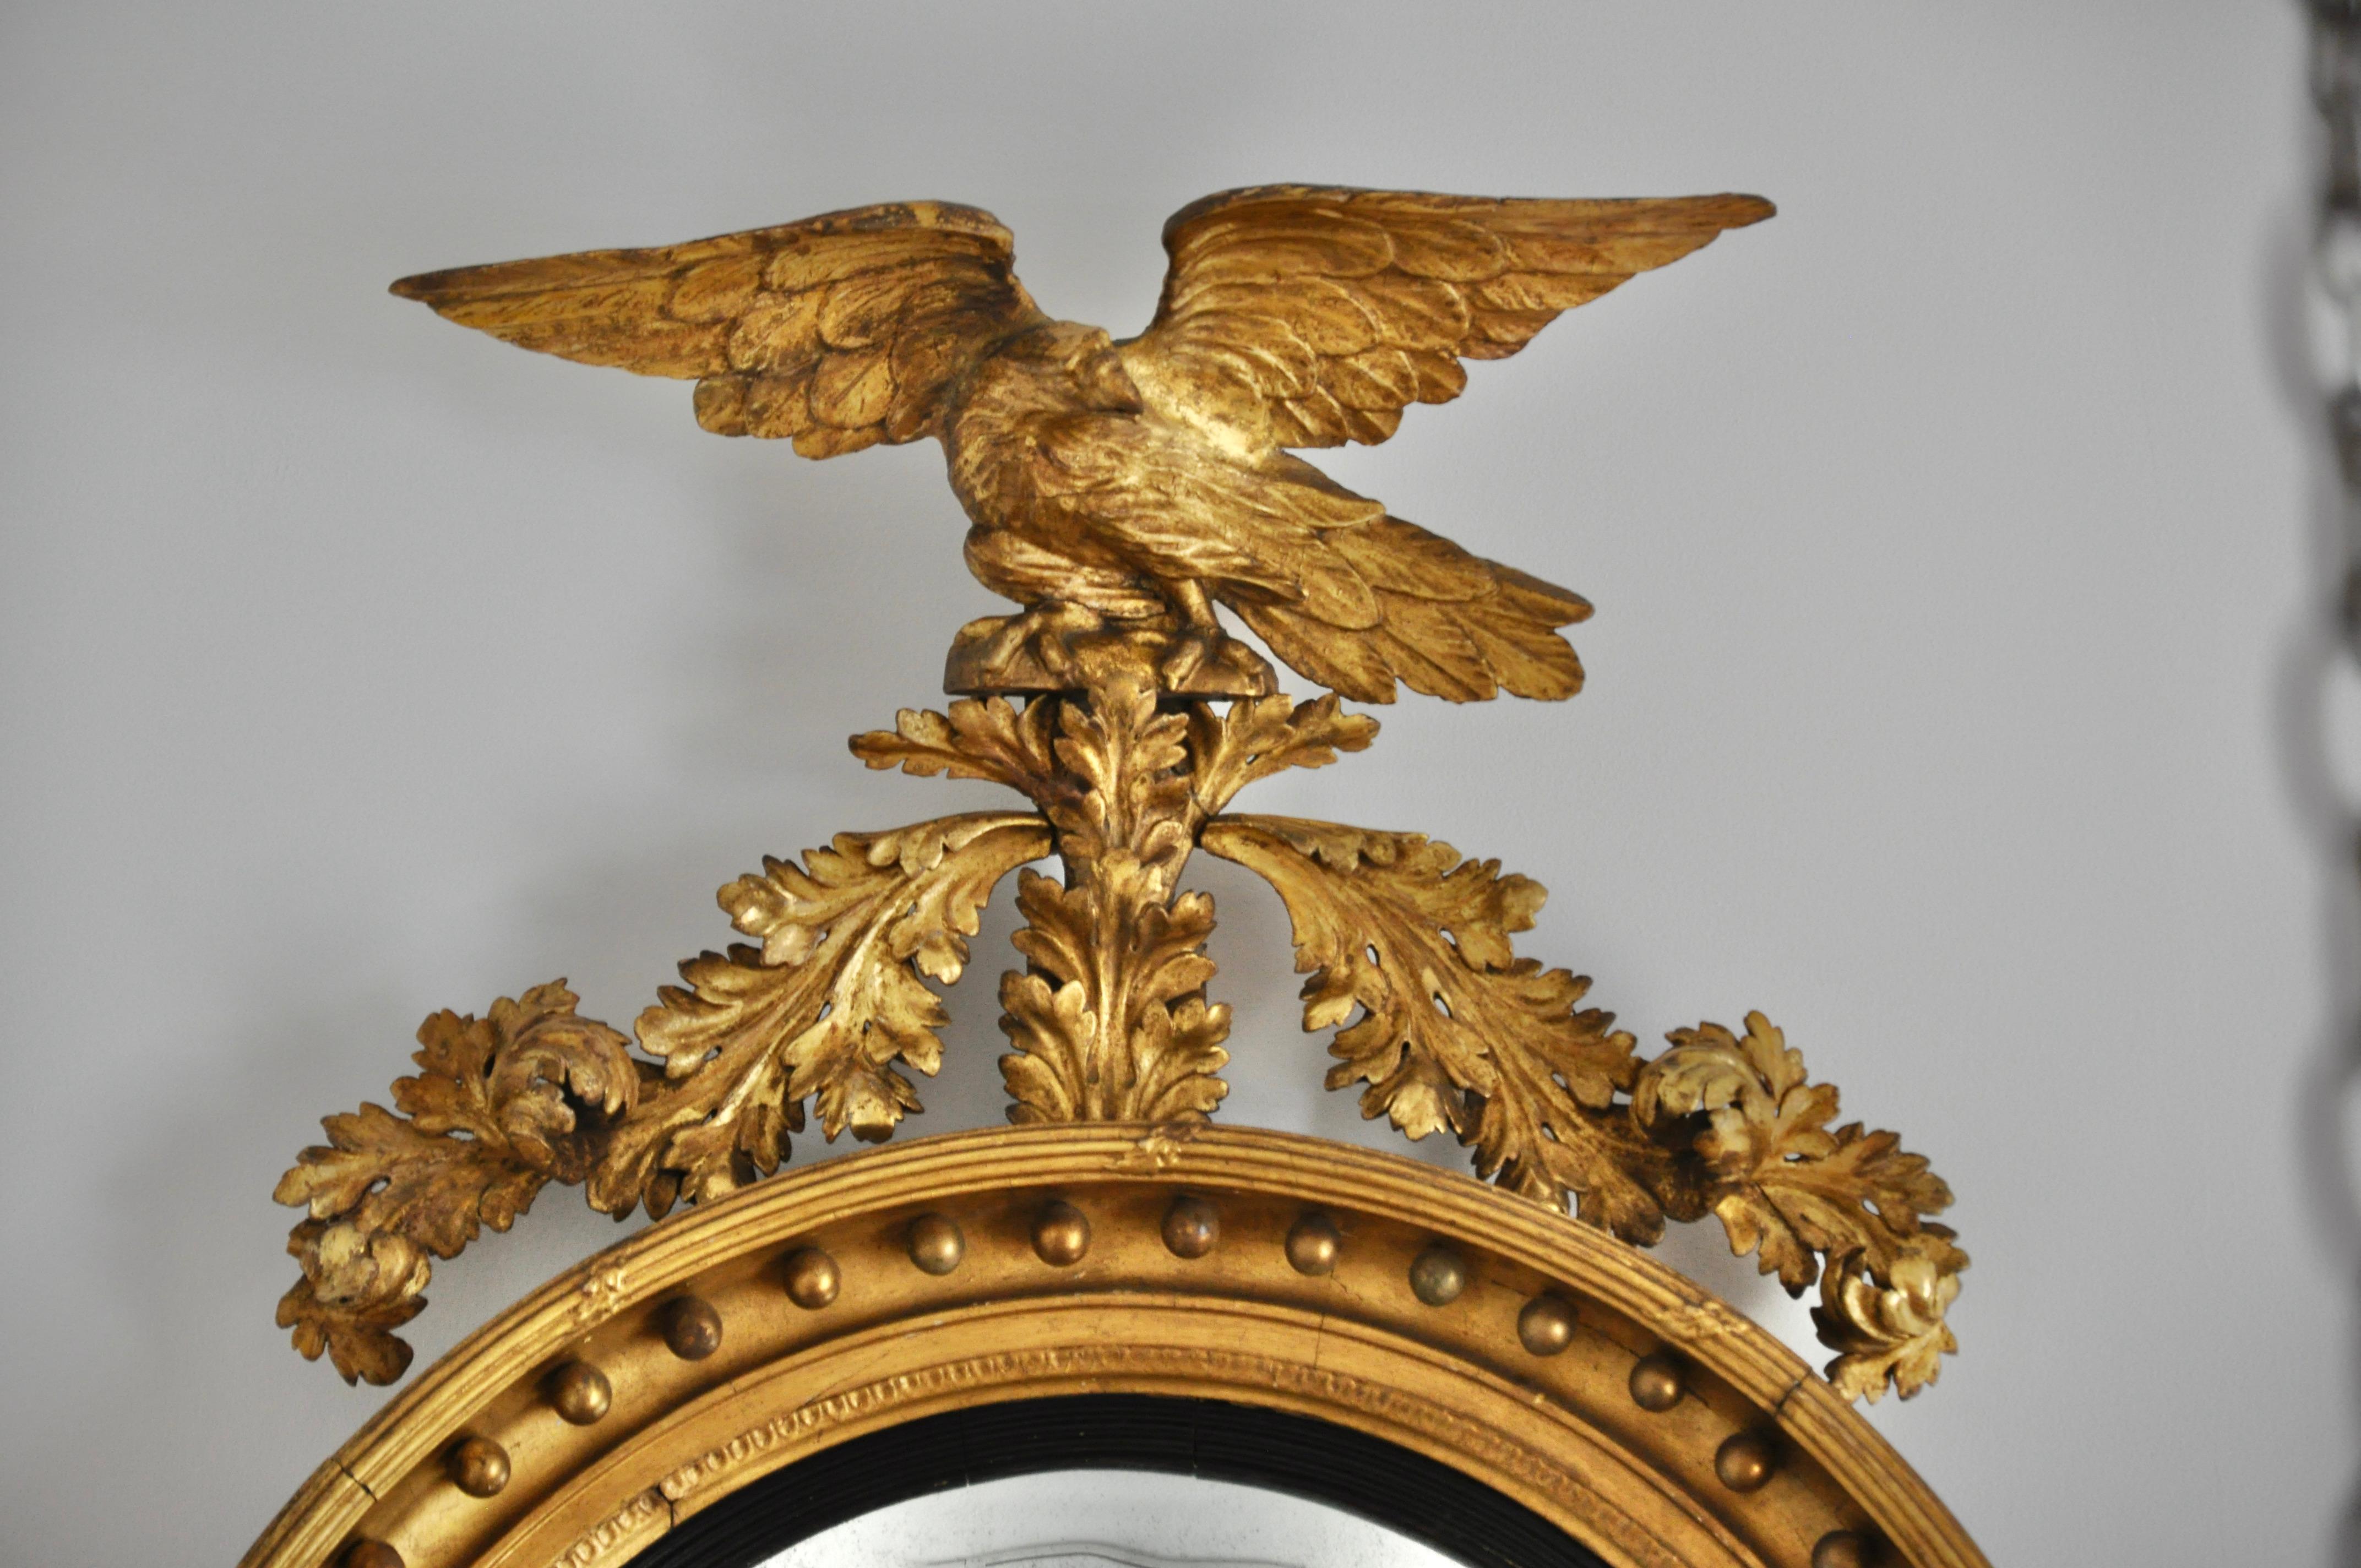 Large scale convex mirror with eagle. Of grand nature in original as found gilding. Though is very difficult to determine in these mirrors are English or American, this particular mirror most definitely has American Federal sensibility.

Note: The